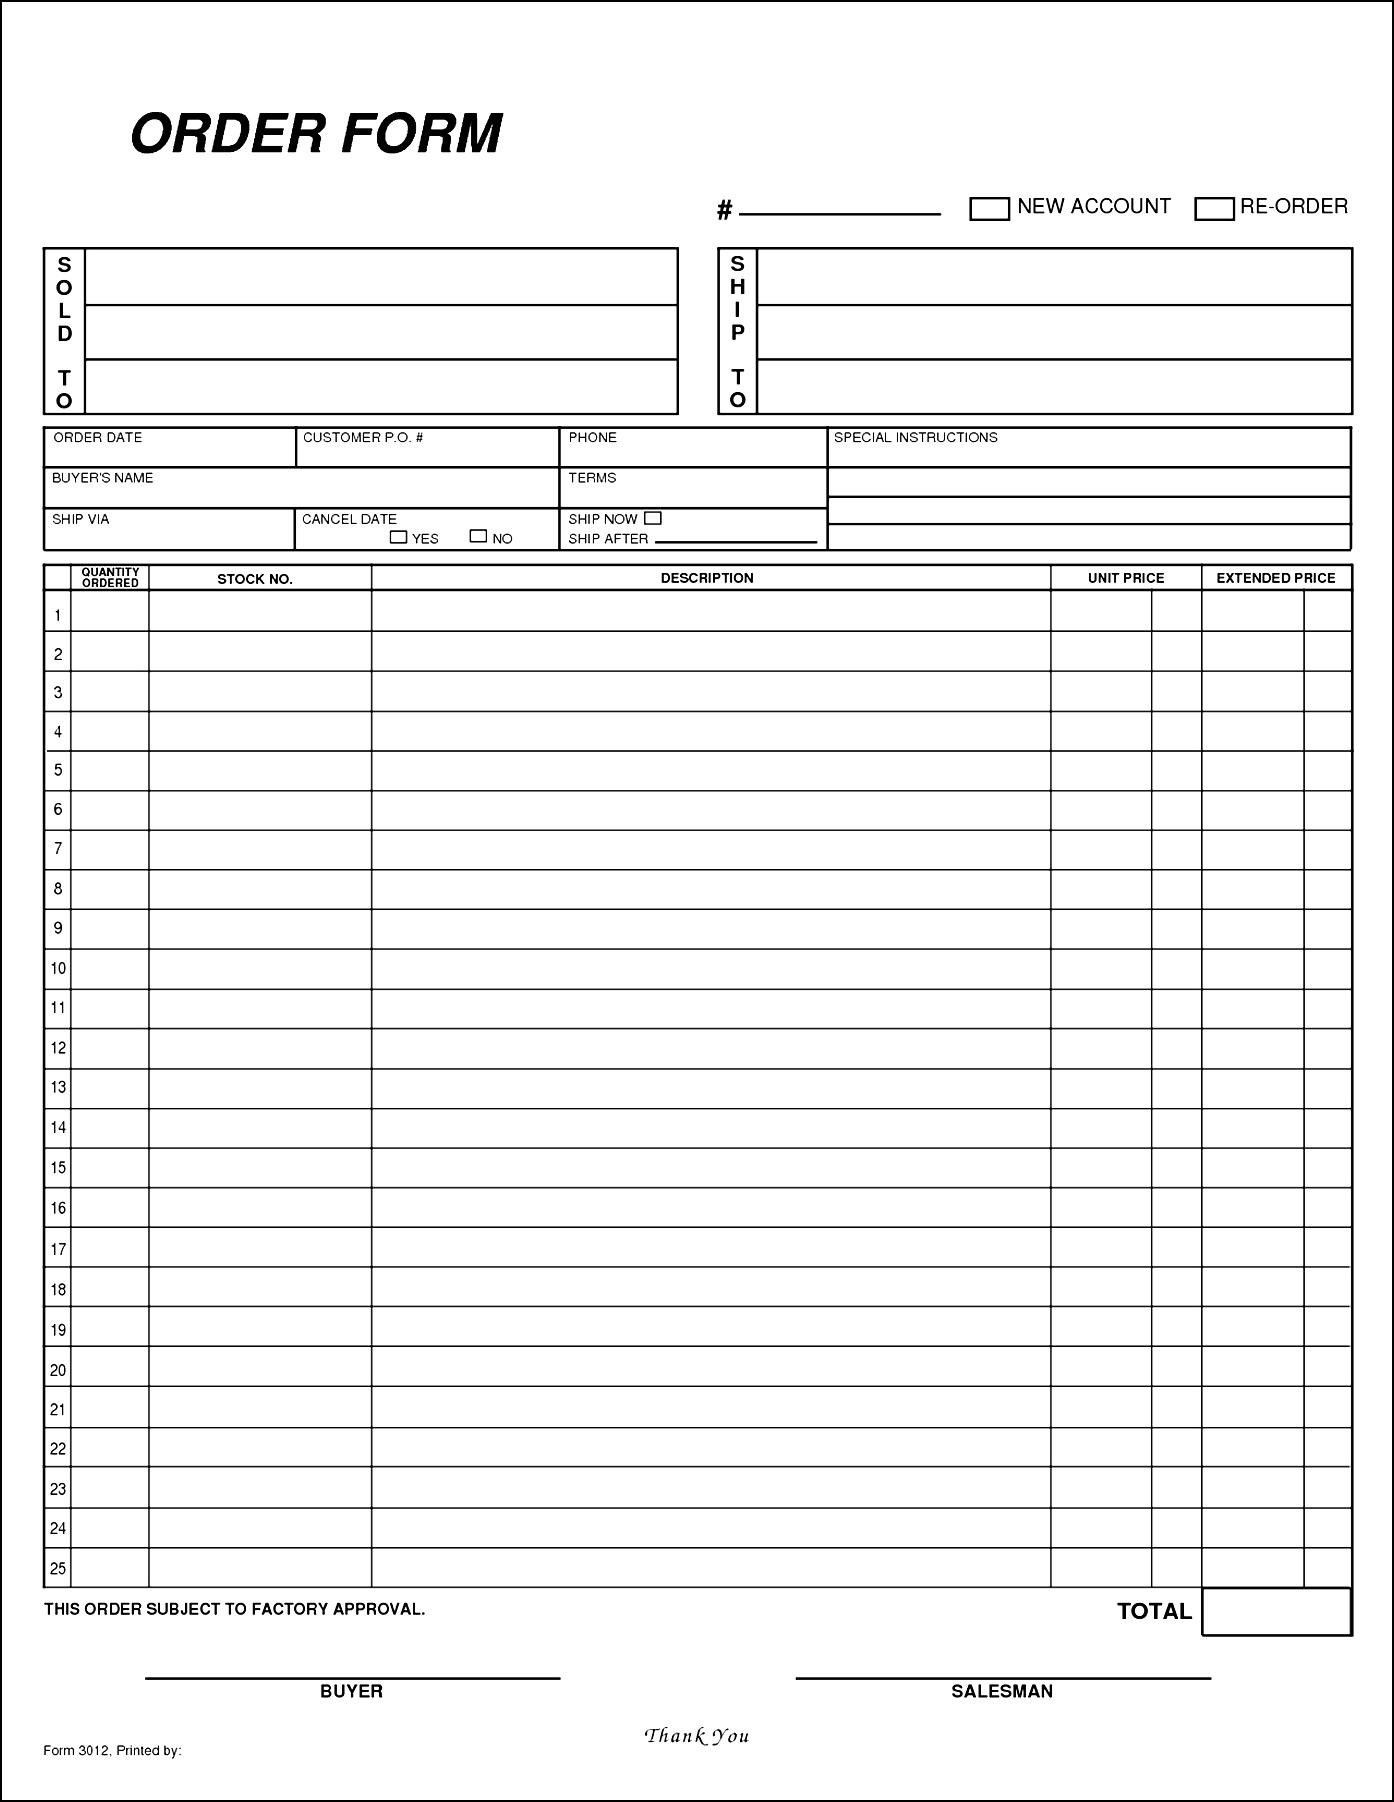 Blank order form Template Free Blank order form Template